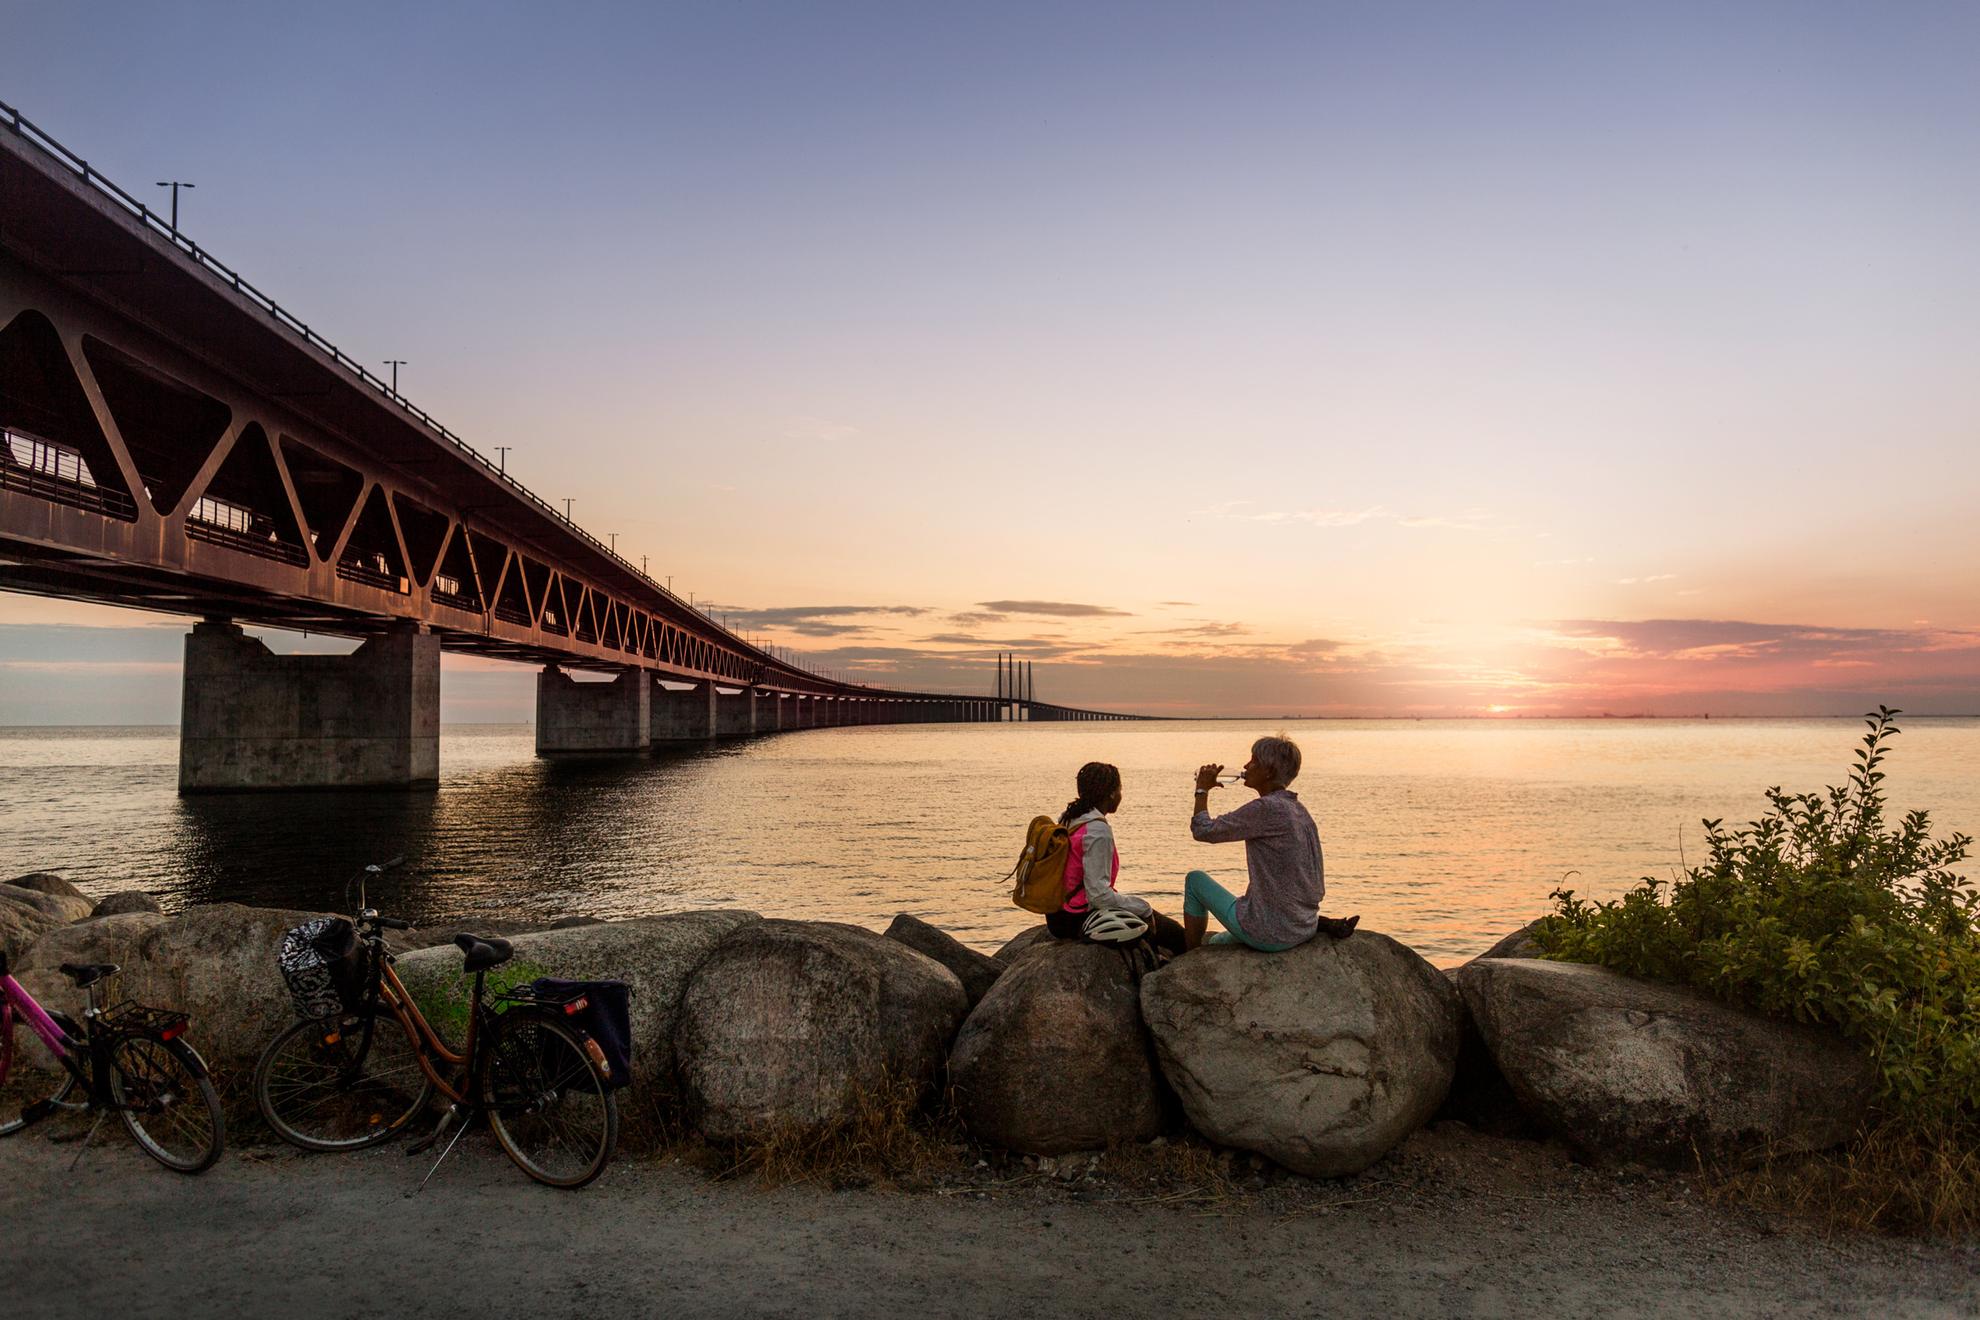 Two women sitting by Öresund Bridge in Malmö at sunset, drinking water from a bottle, two bikes parked on the gravel road.